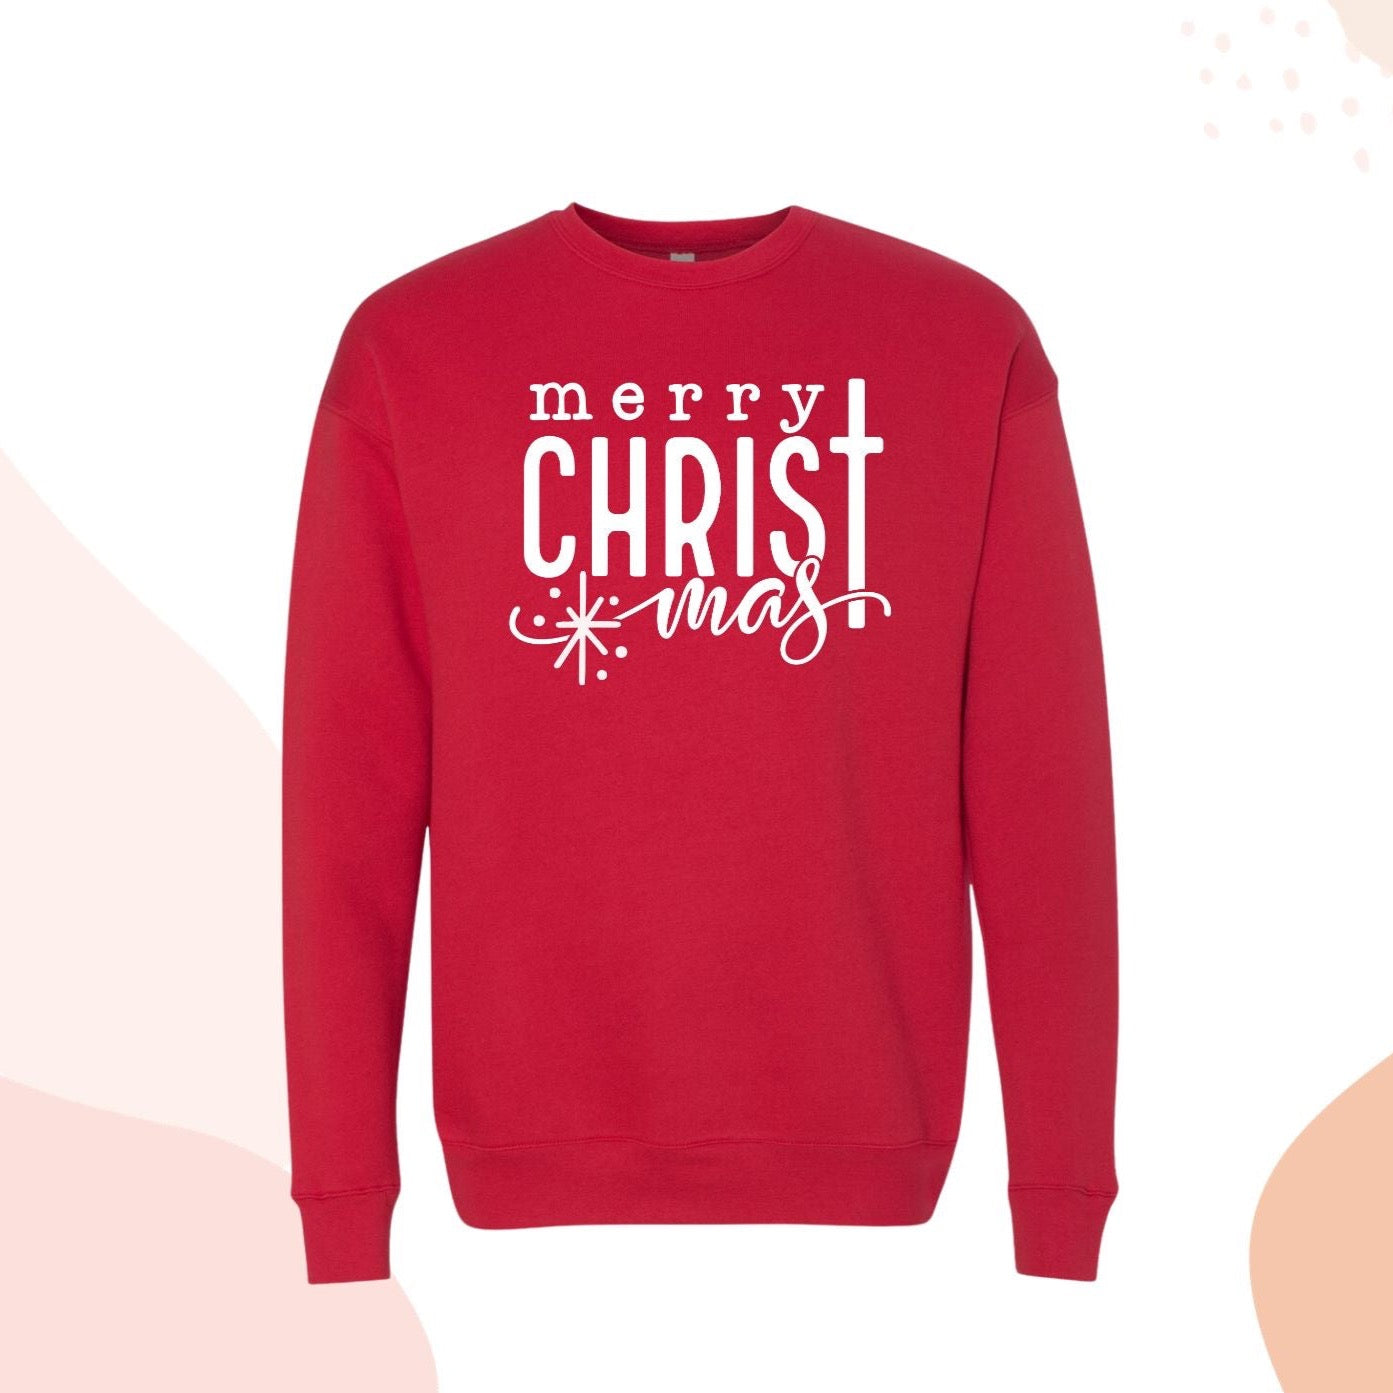 Red Merry CHRISTmas Sweatshirt for Her, Cute Shirt for Christmas Red, Christian Christmas Sweater, Religious Christmas Crewneck Shirt  for Women Red